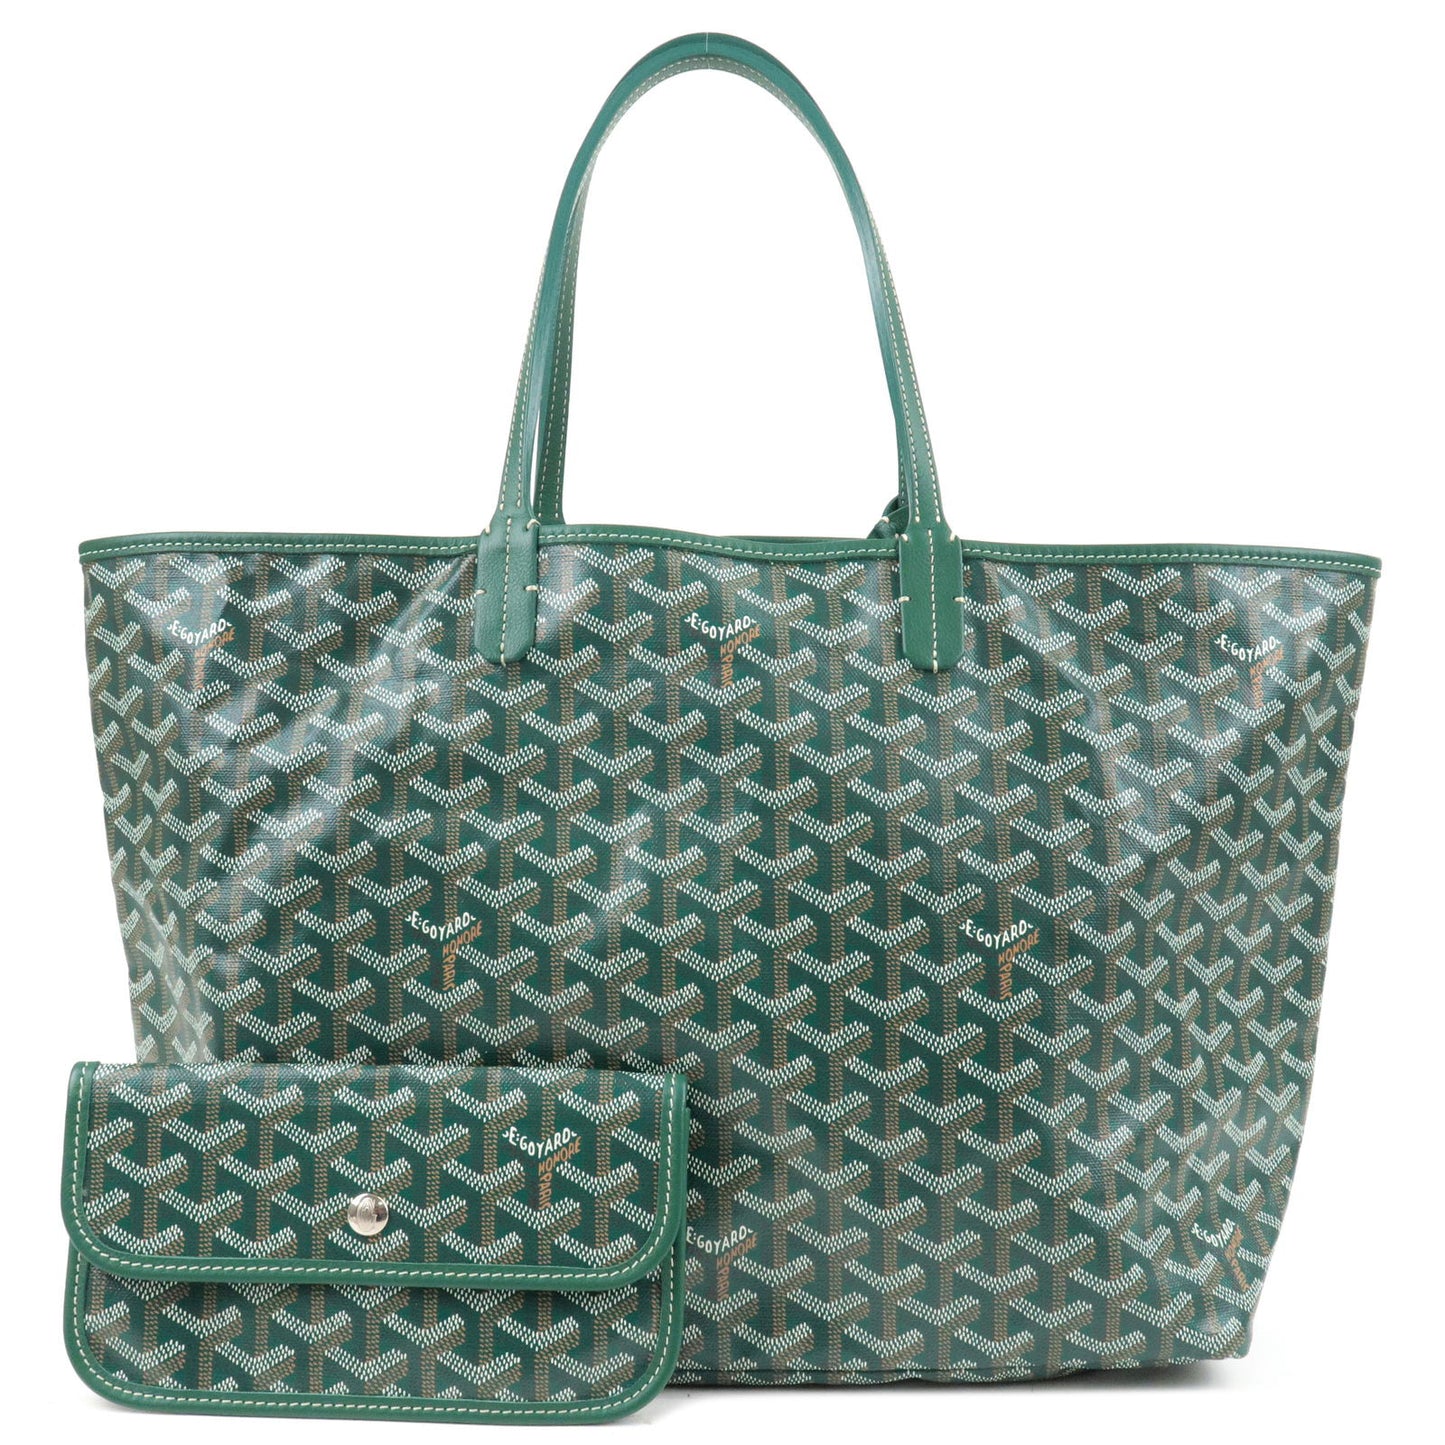 Goyard Vendome bag, all colors are wonderful, which one is your favorite? :  r/DecideThisForMe